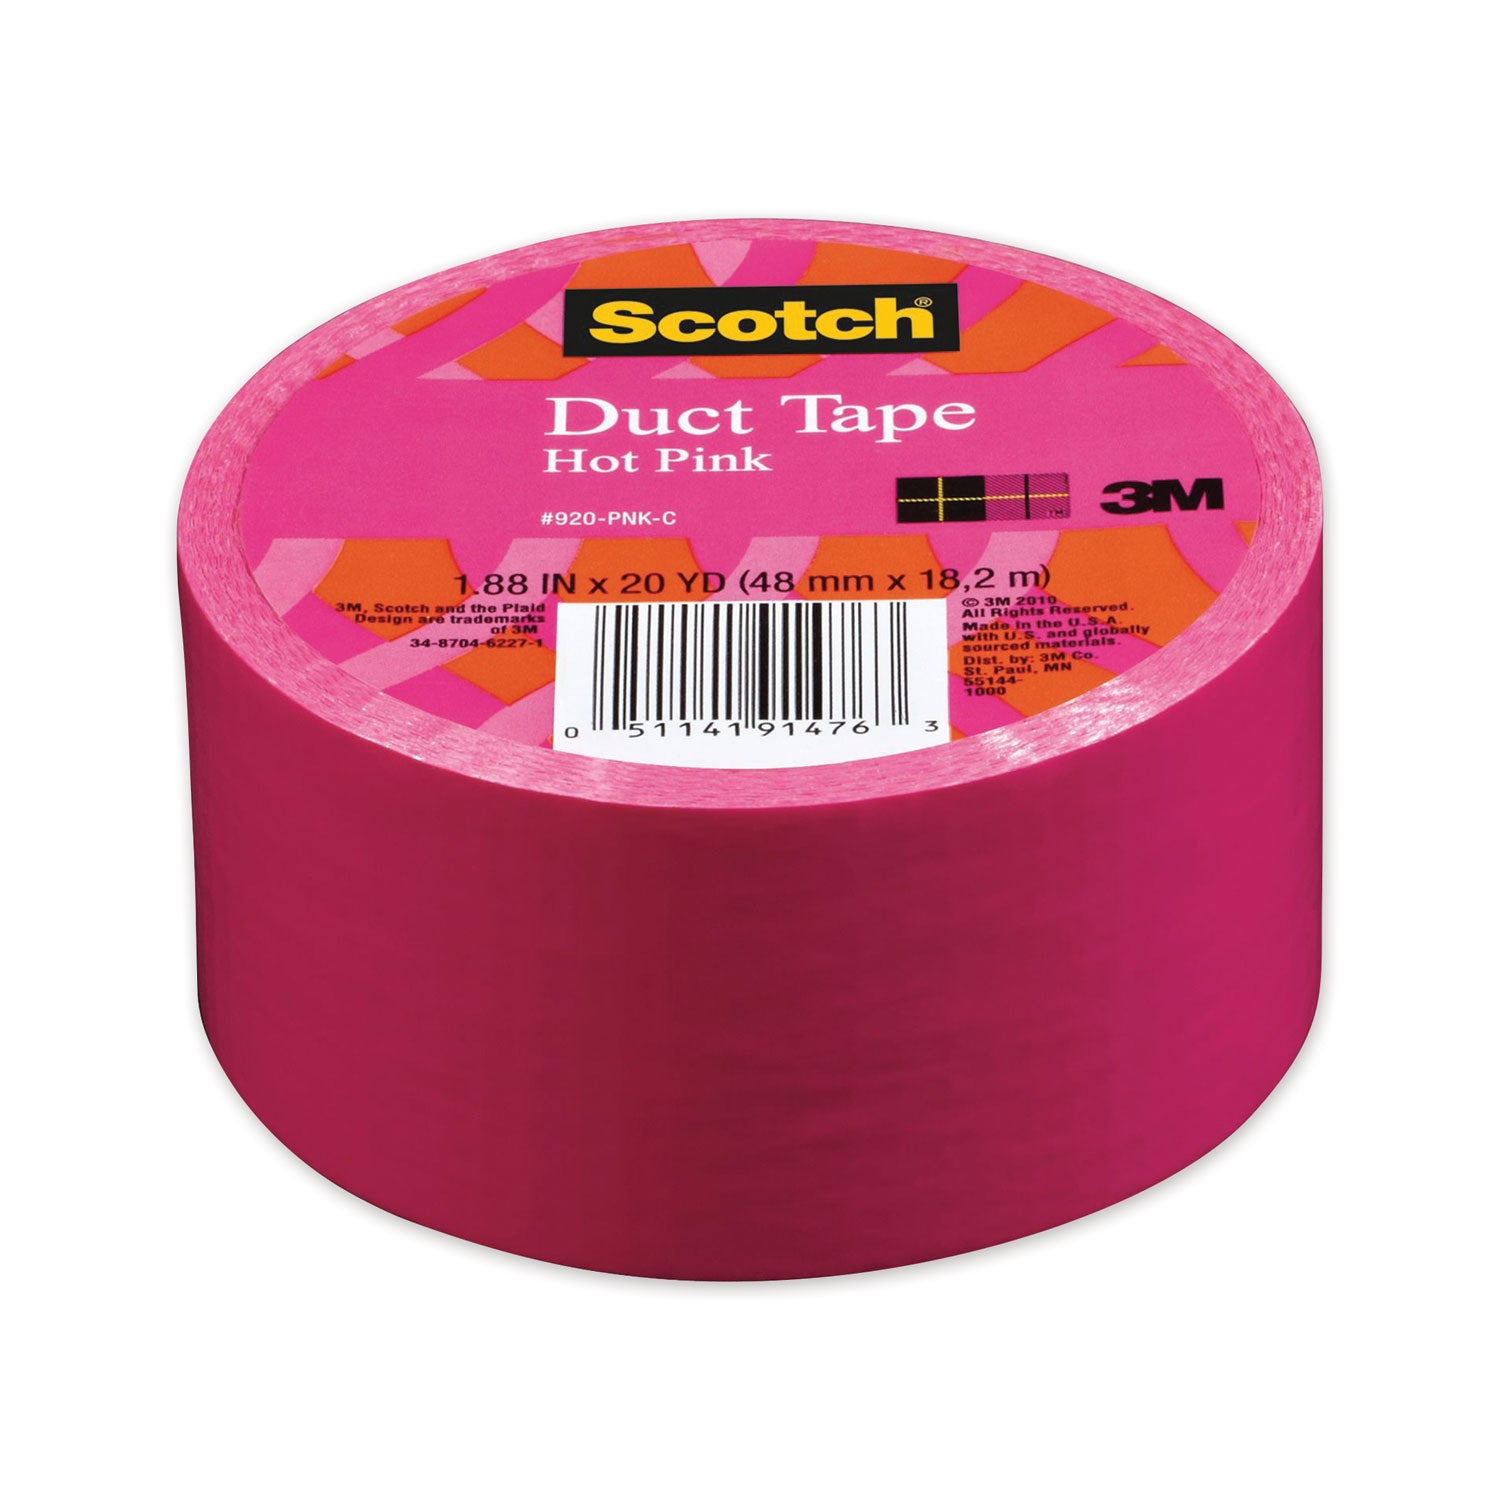 duct-tape-188-x-20-yds-hot-pink_mmm70005058170 - 1